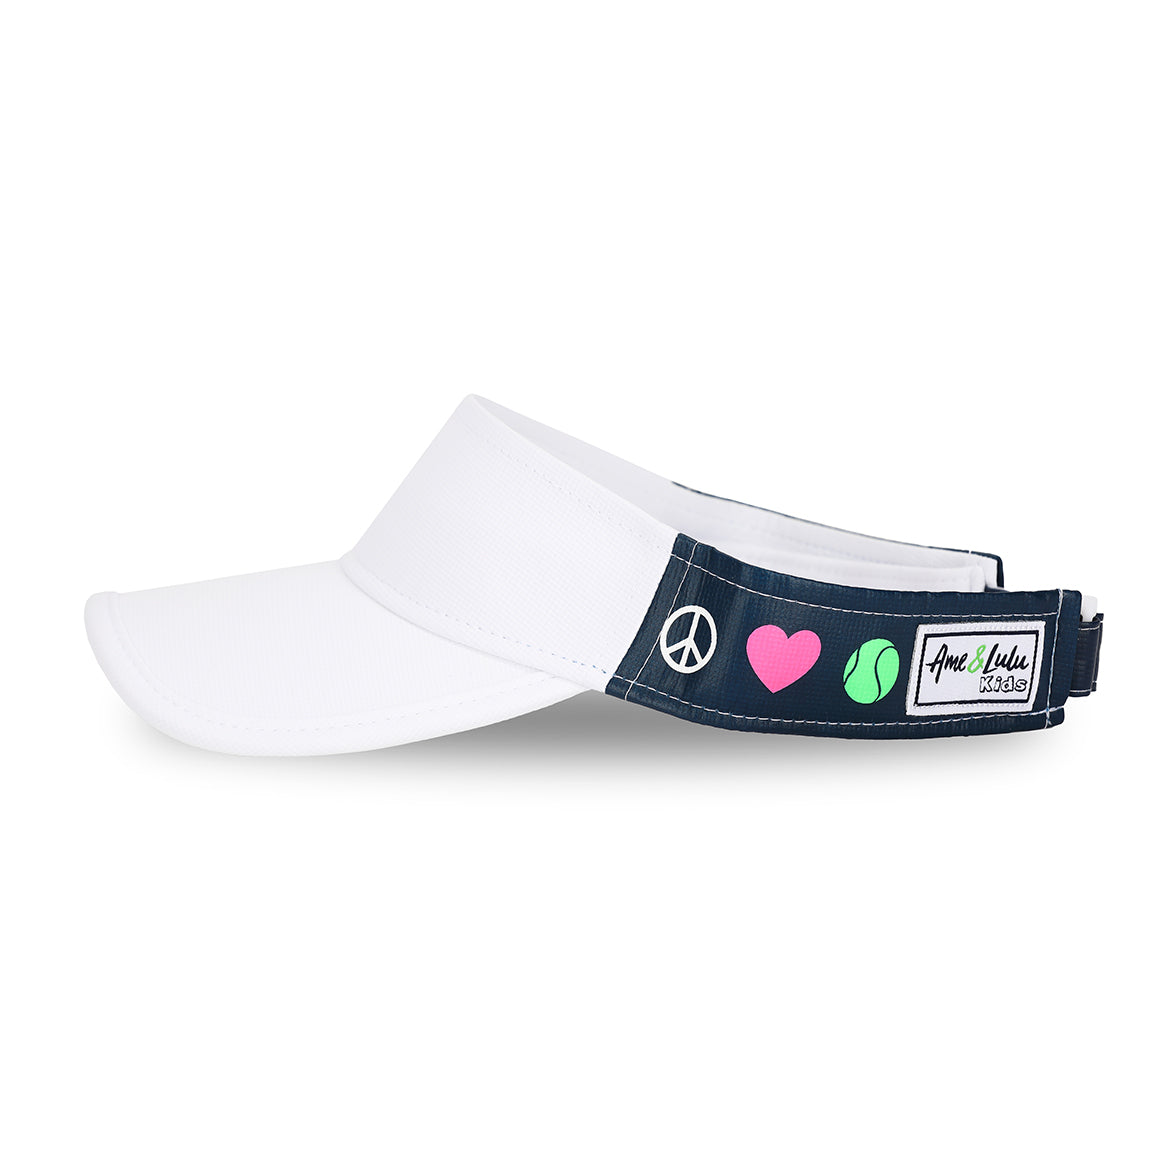 Side view of navy kids visor with white peace sign, pink heart and green tennis ball printed on sides